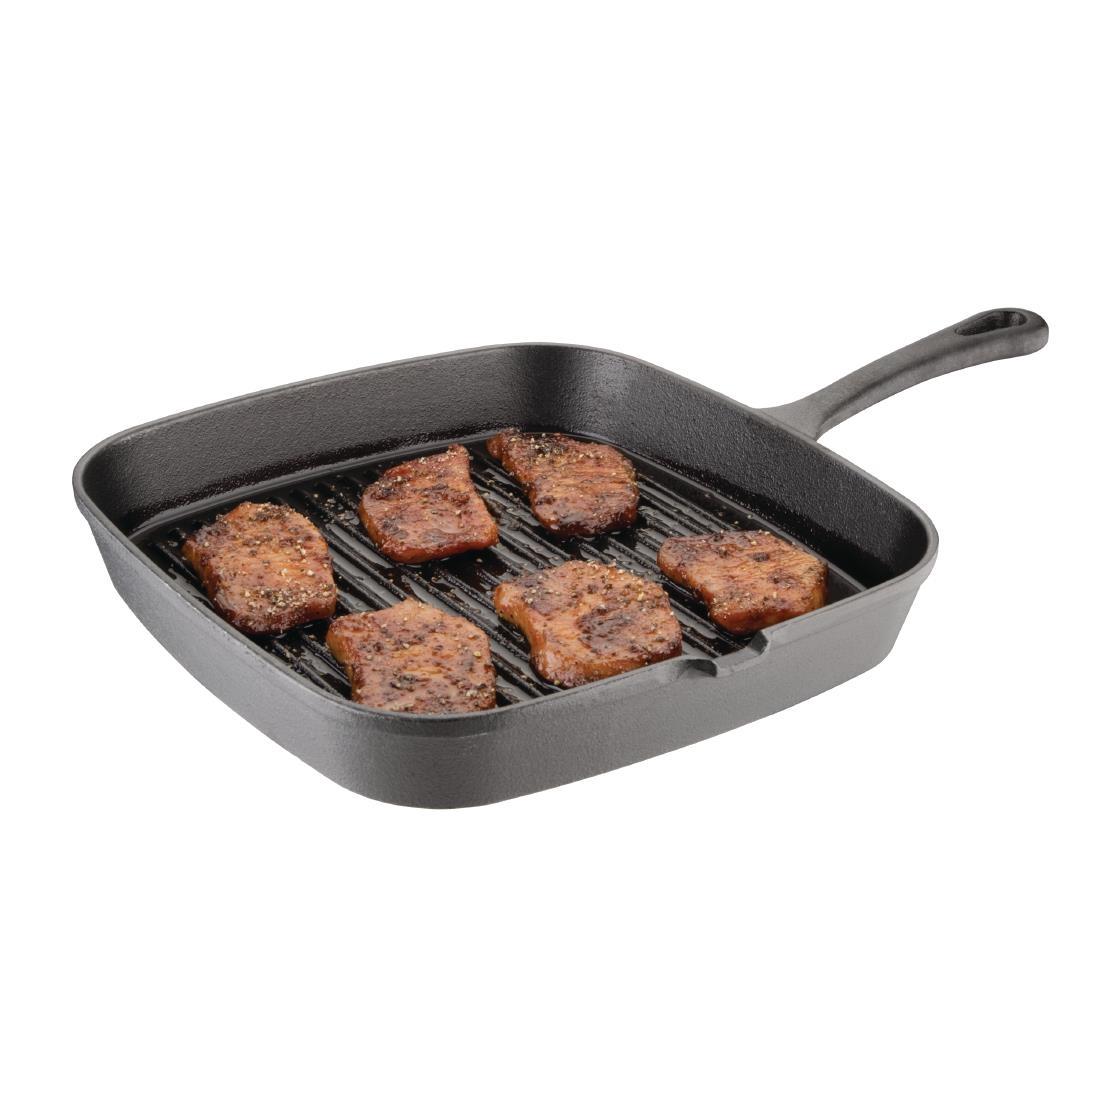 Vogue Square Cast Iron Ribbed Skillet Pan 241mm - M653  - 5